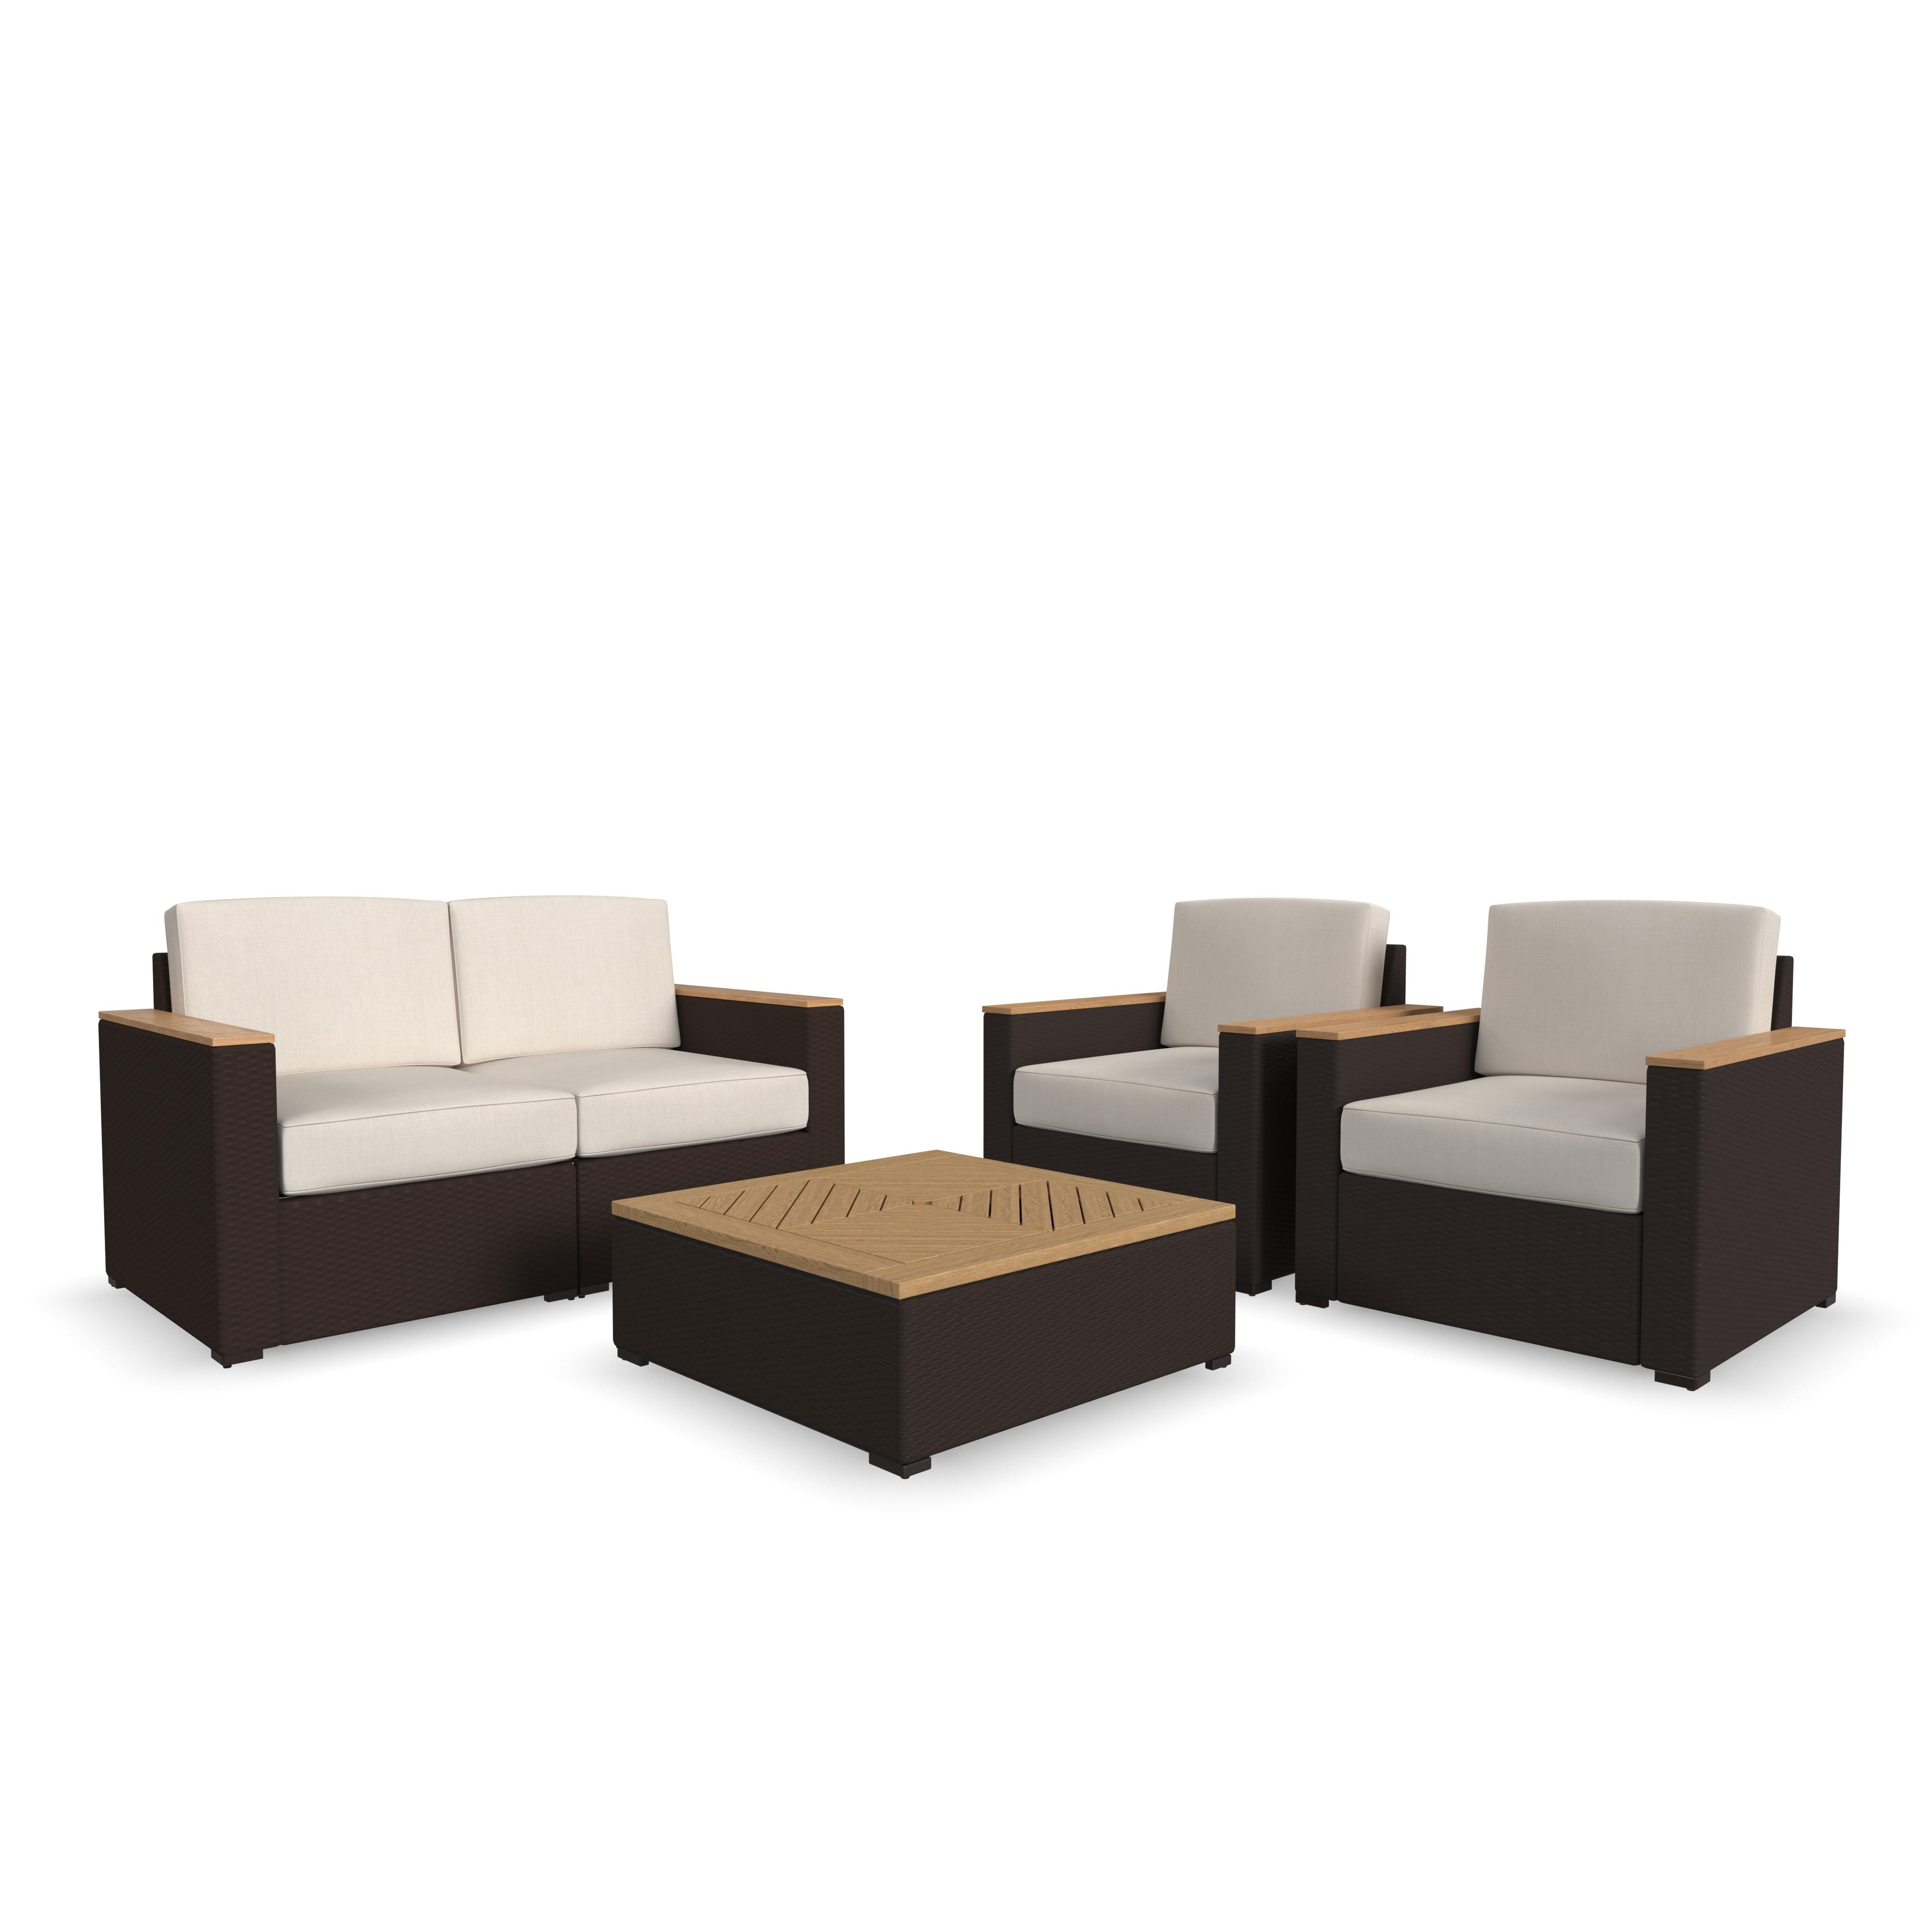 Homestyles Palm Springs Outdoor Loveseat Set